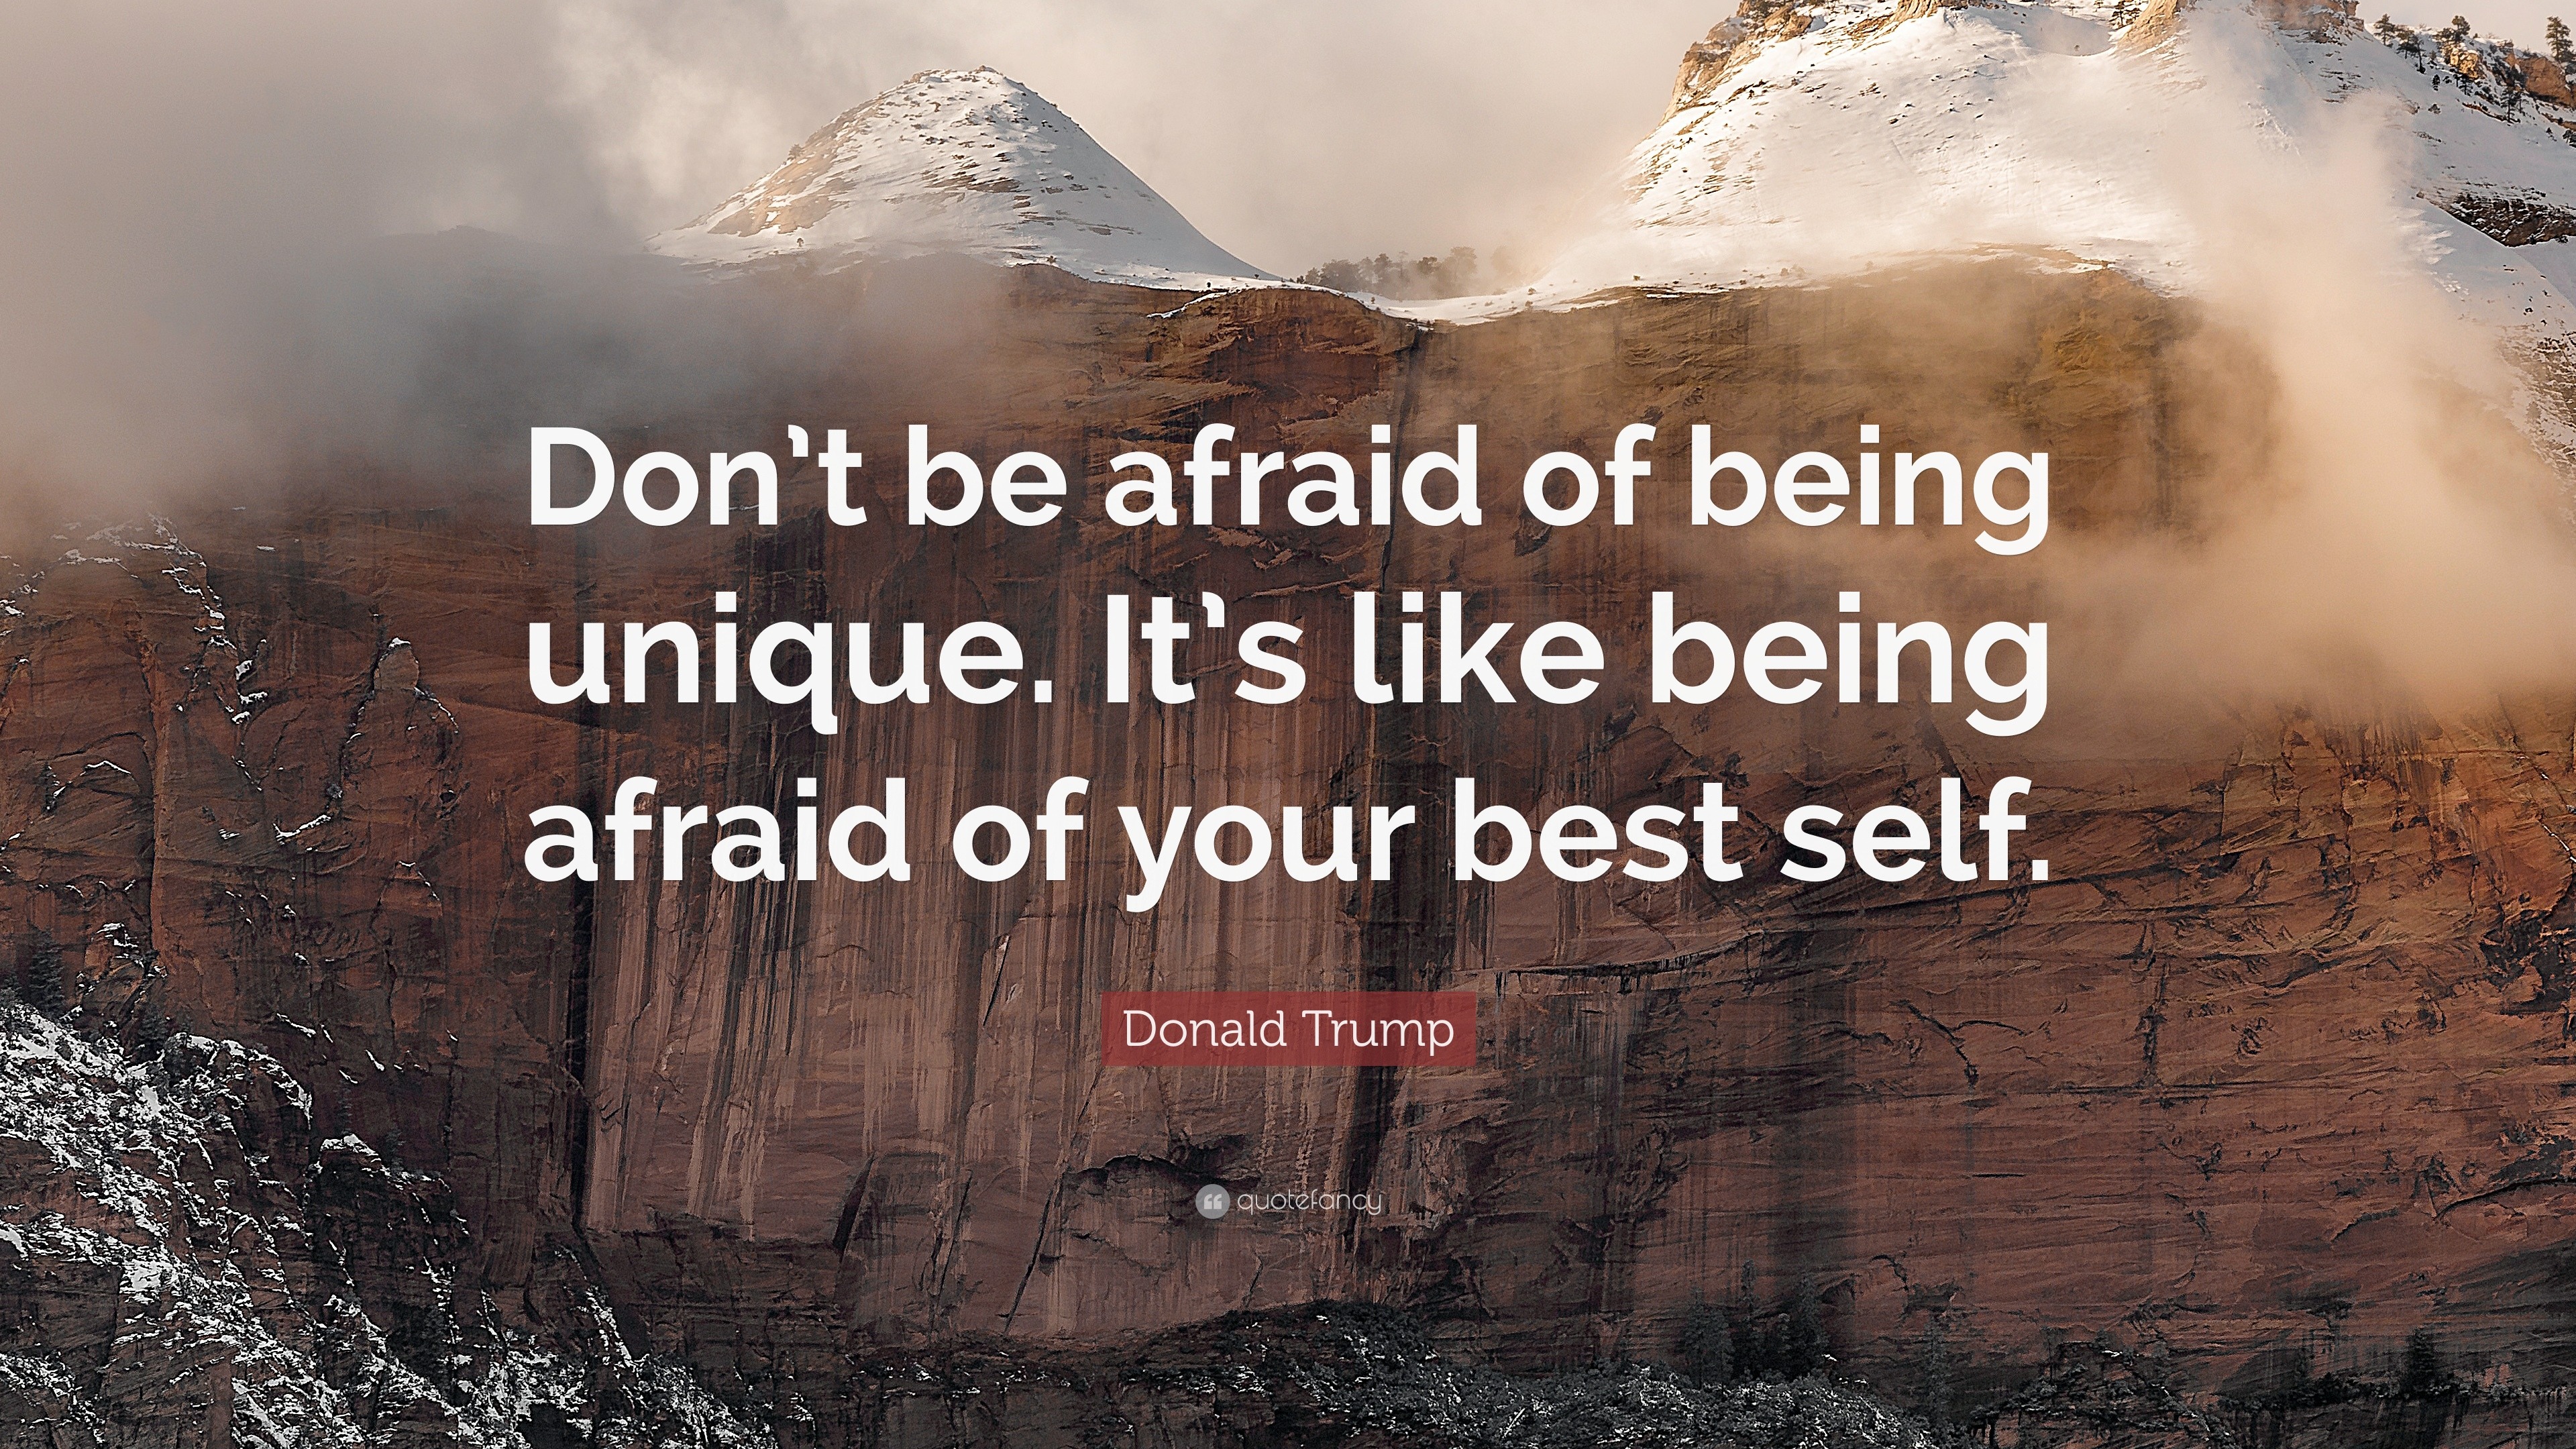 Donald Trump Quote  Don t be afraid of being unique  It s 